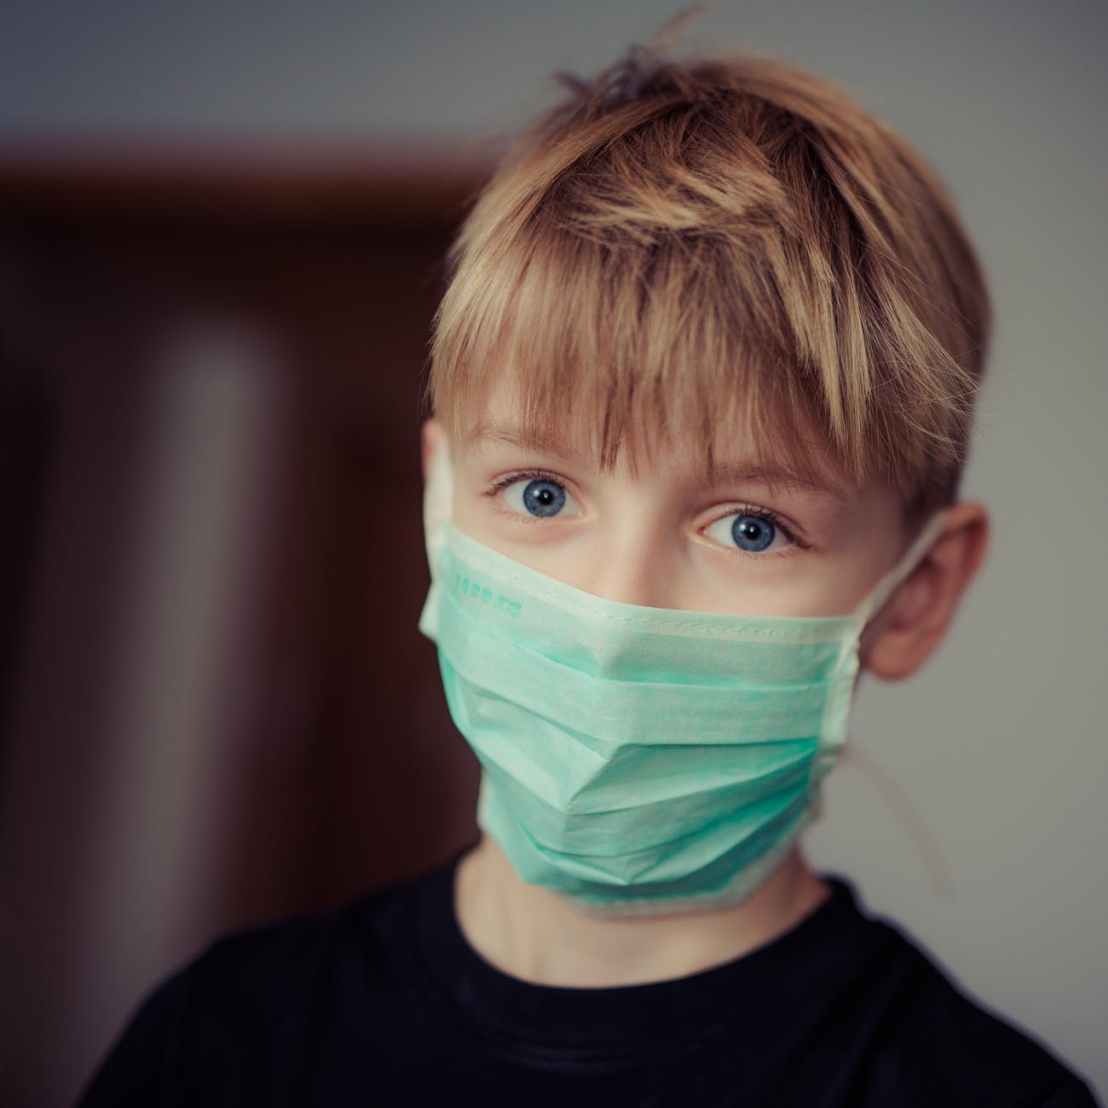 Kid with a medical mask on looking into the camera. Photo by Janko Ferlic on Pexels.com